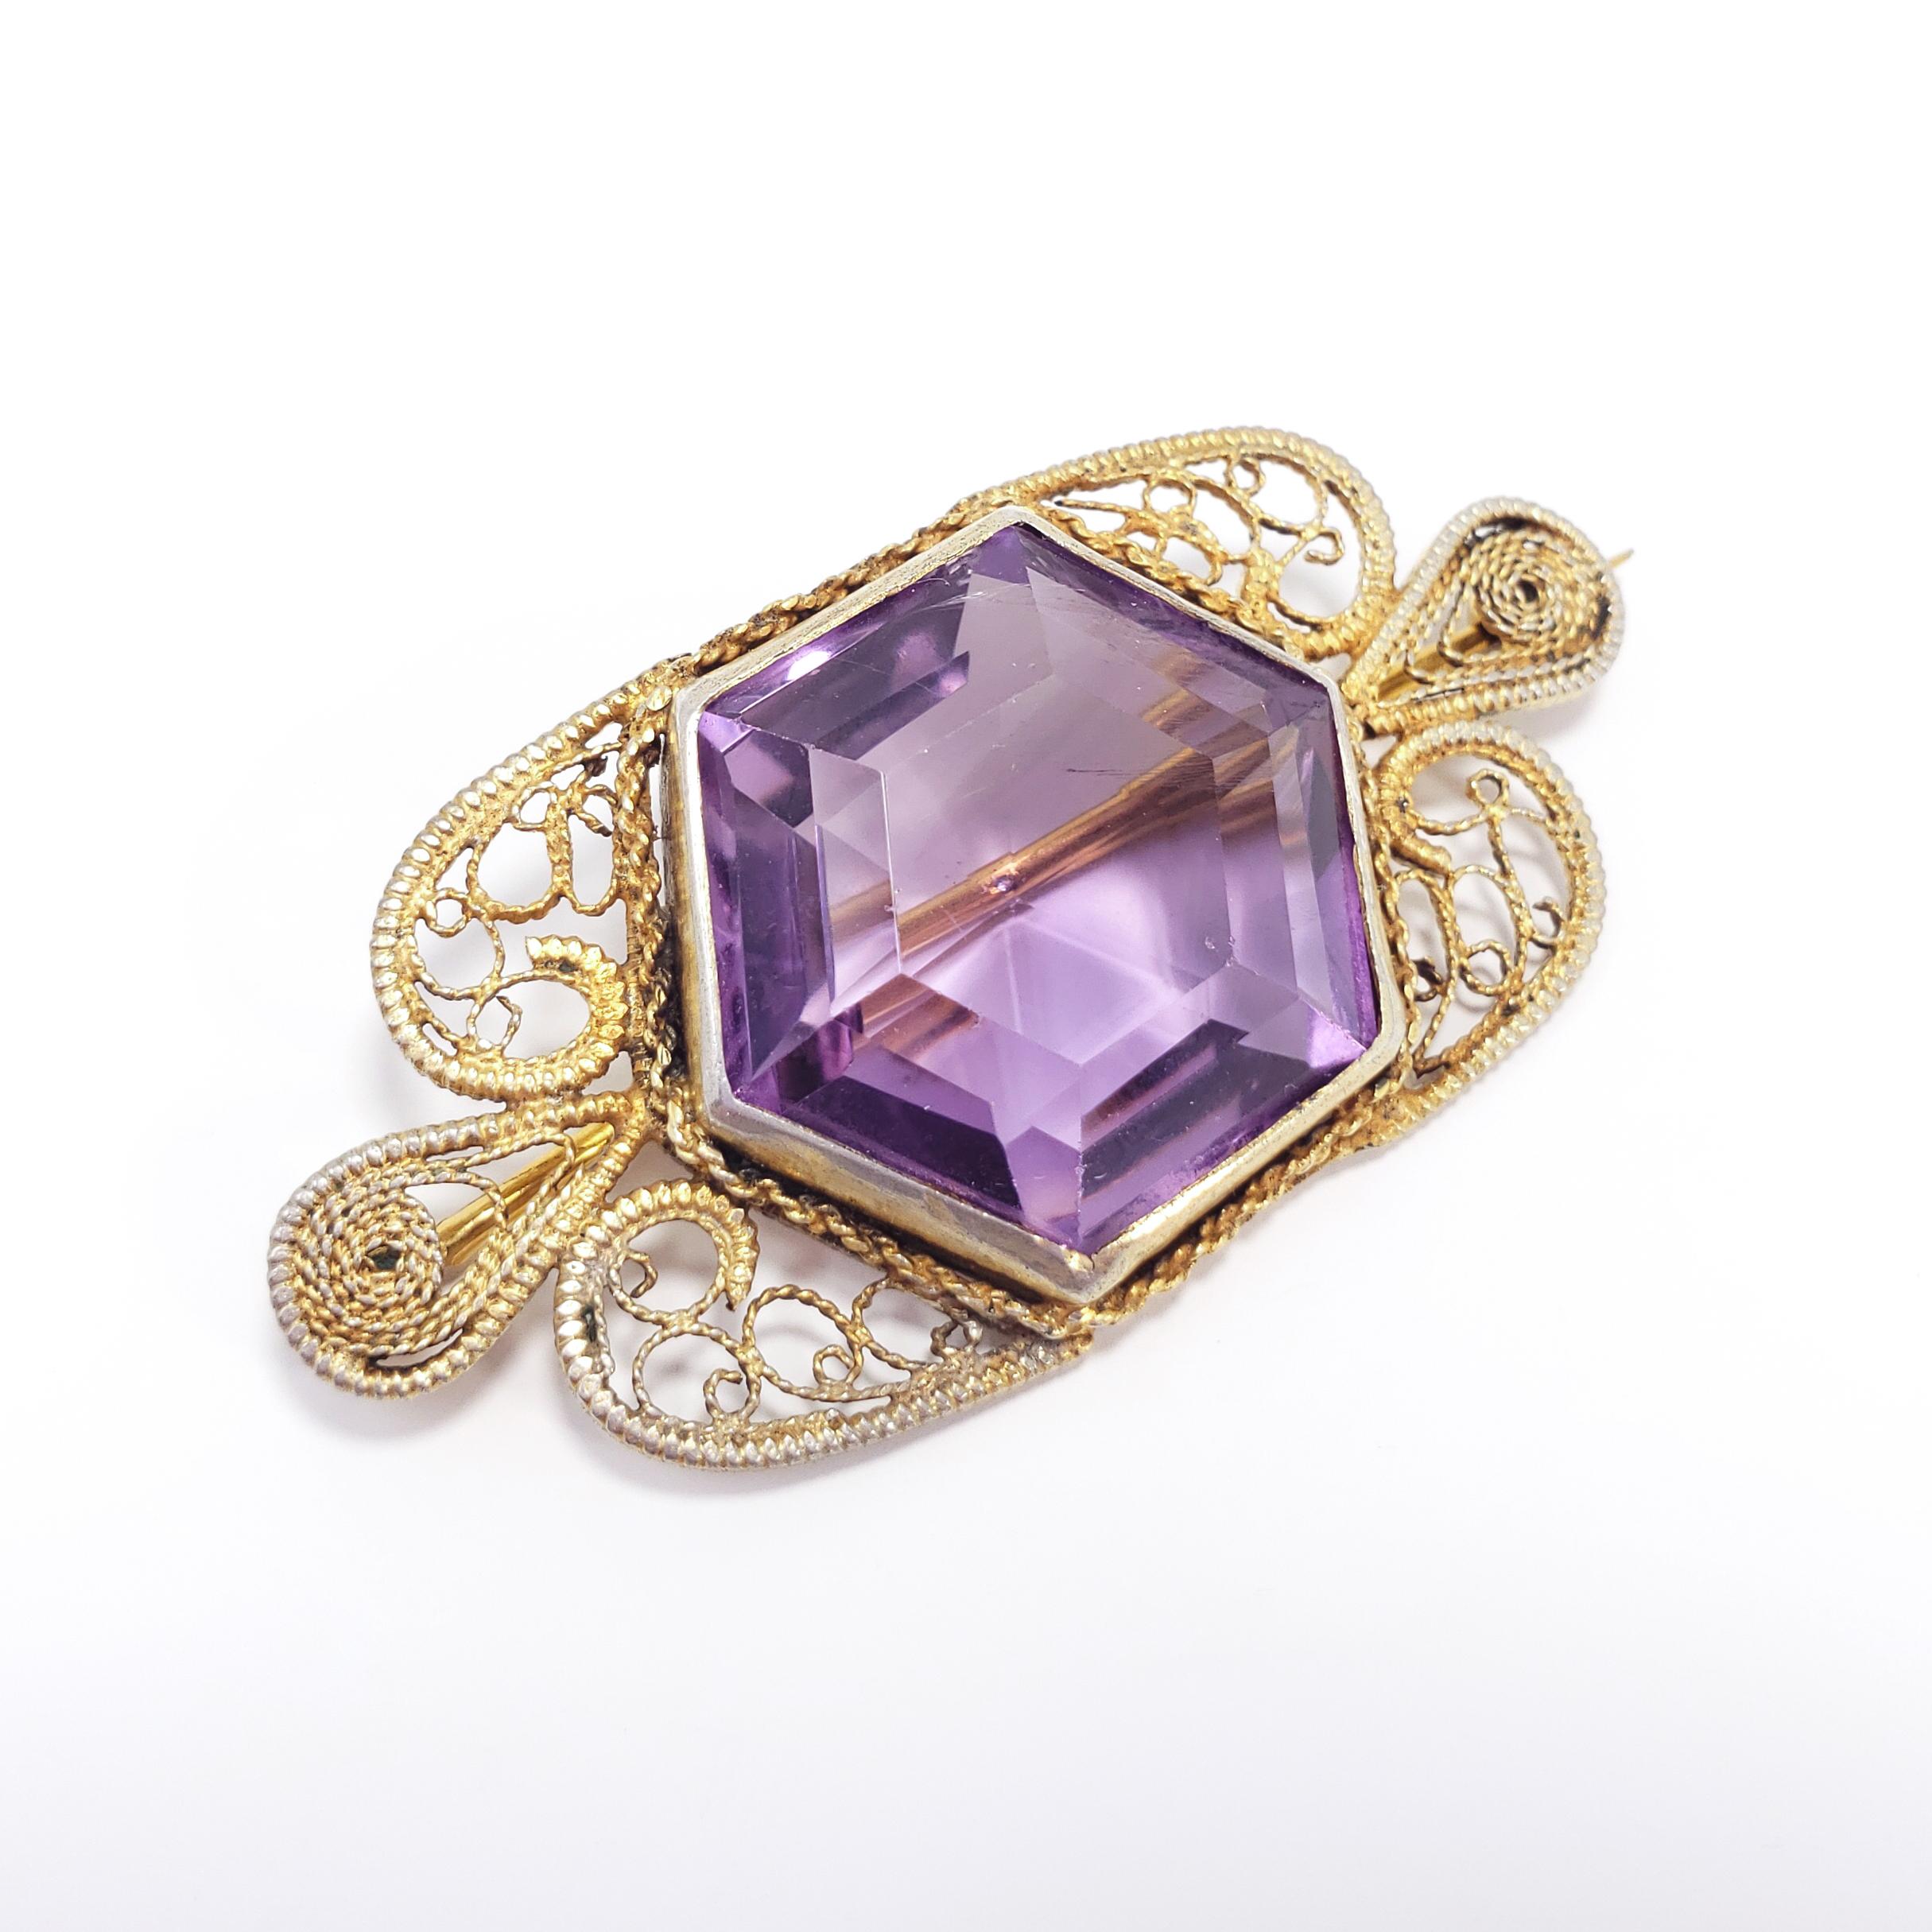 An ornate brooch from the Victorian/Art Nouveau era featuring a genuine, faceted, open-back amethyst bezel set in a textured filigree vermeil setting. 

Amethyst diameter approx 2 cm